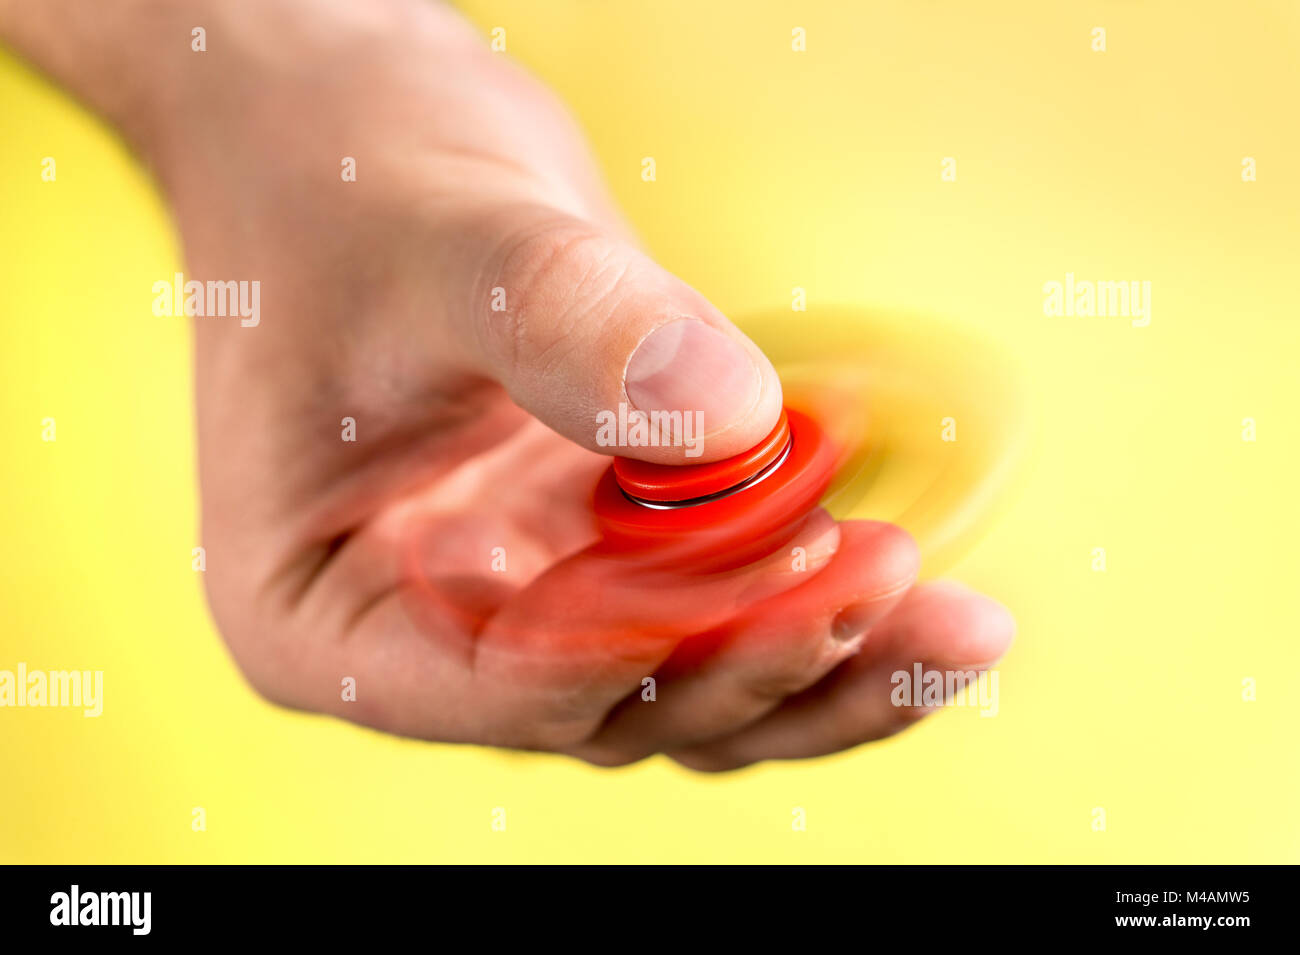 Red fidget spinner spinning fast between fingers against light yellow background. Stock Photo